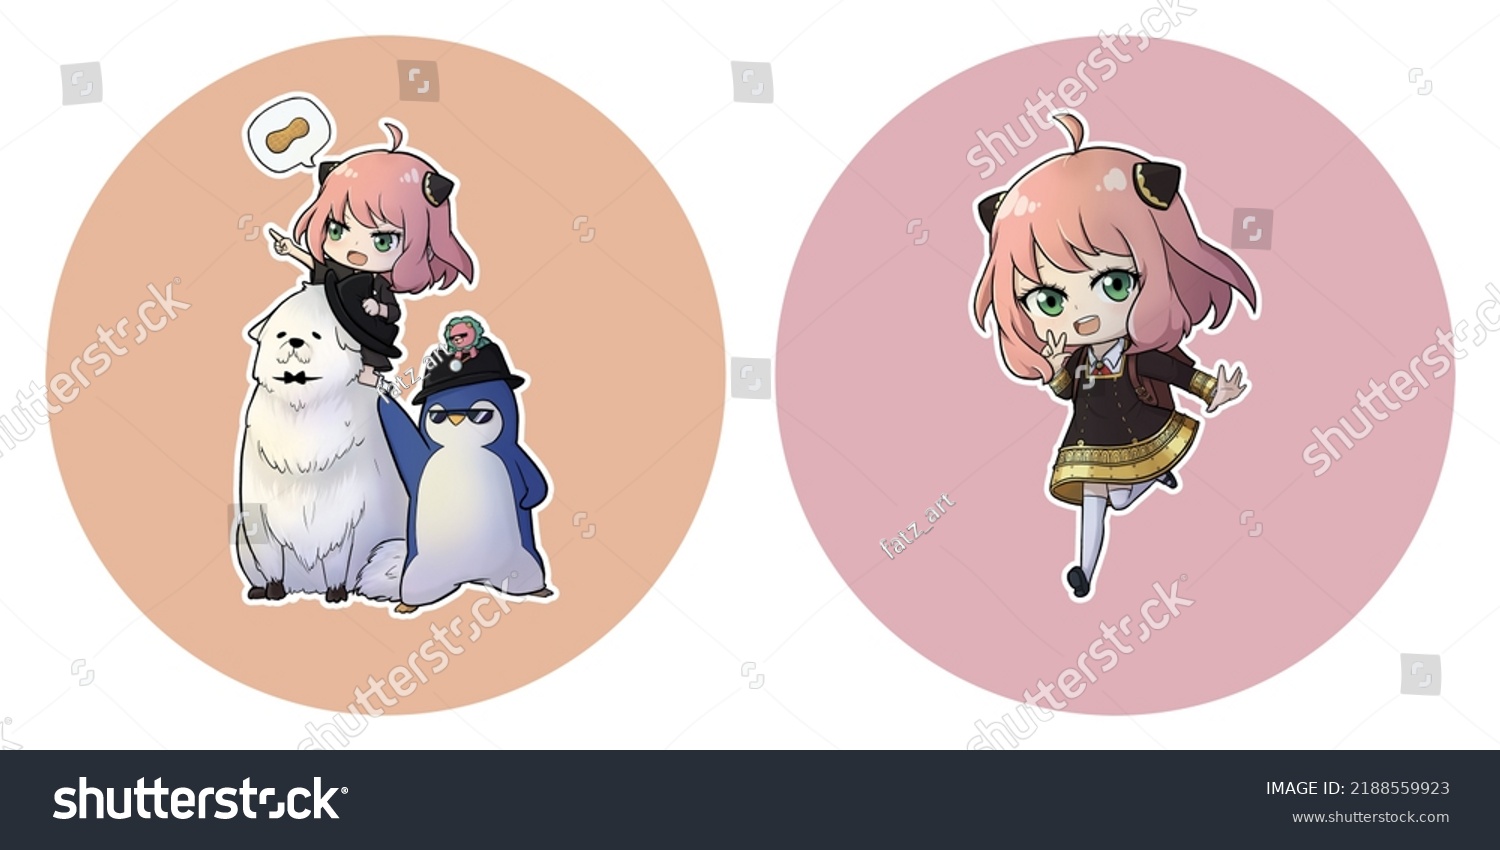 SVG of anime illustration in chibi characters for stickers. svg